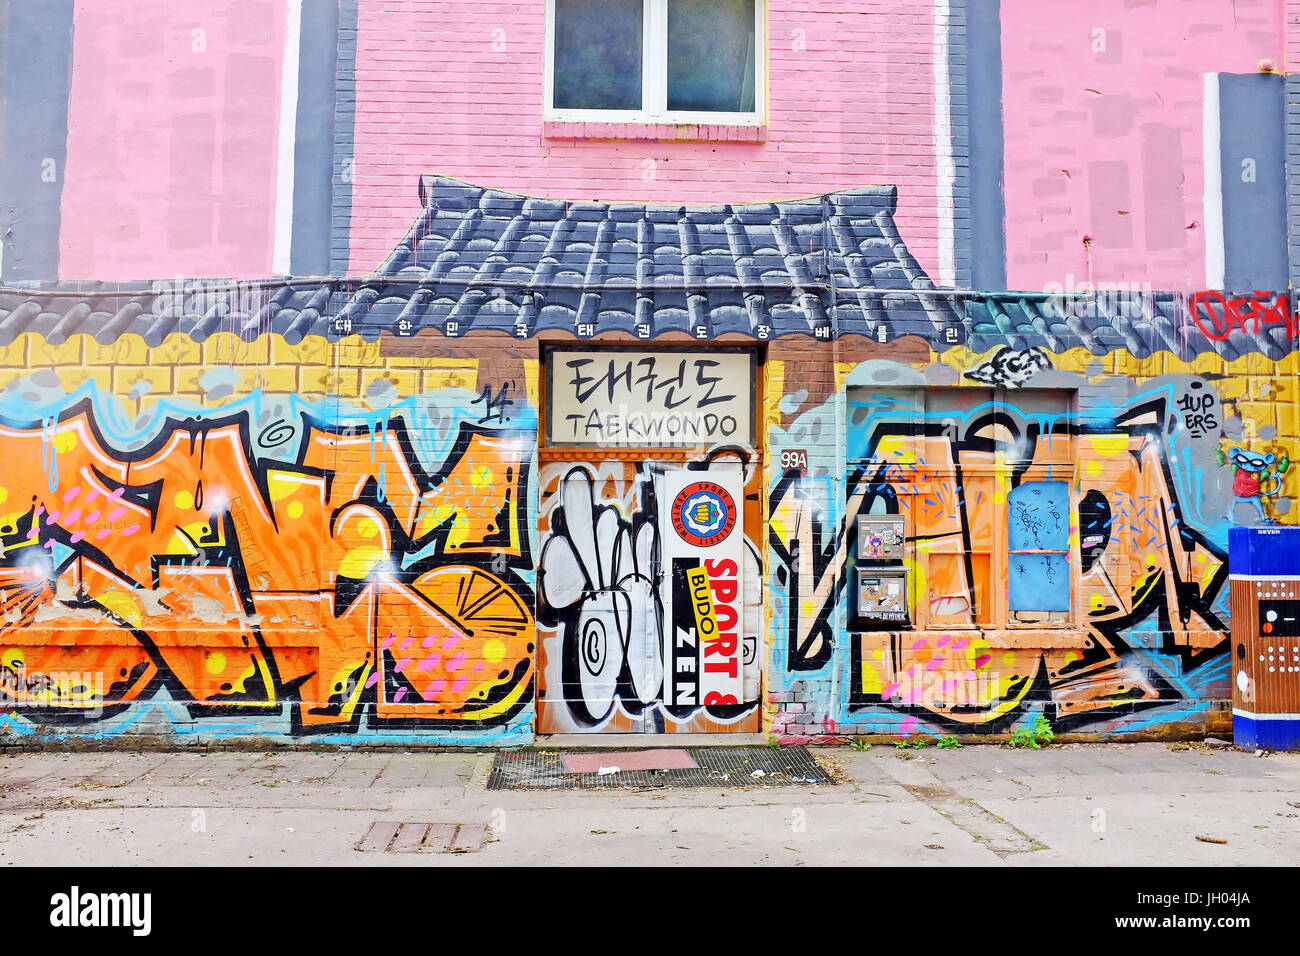 Grafitti filled building designed to resemble an Asian building offering Taekwondo in Berlin, Germany. Stock Photo